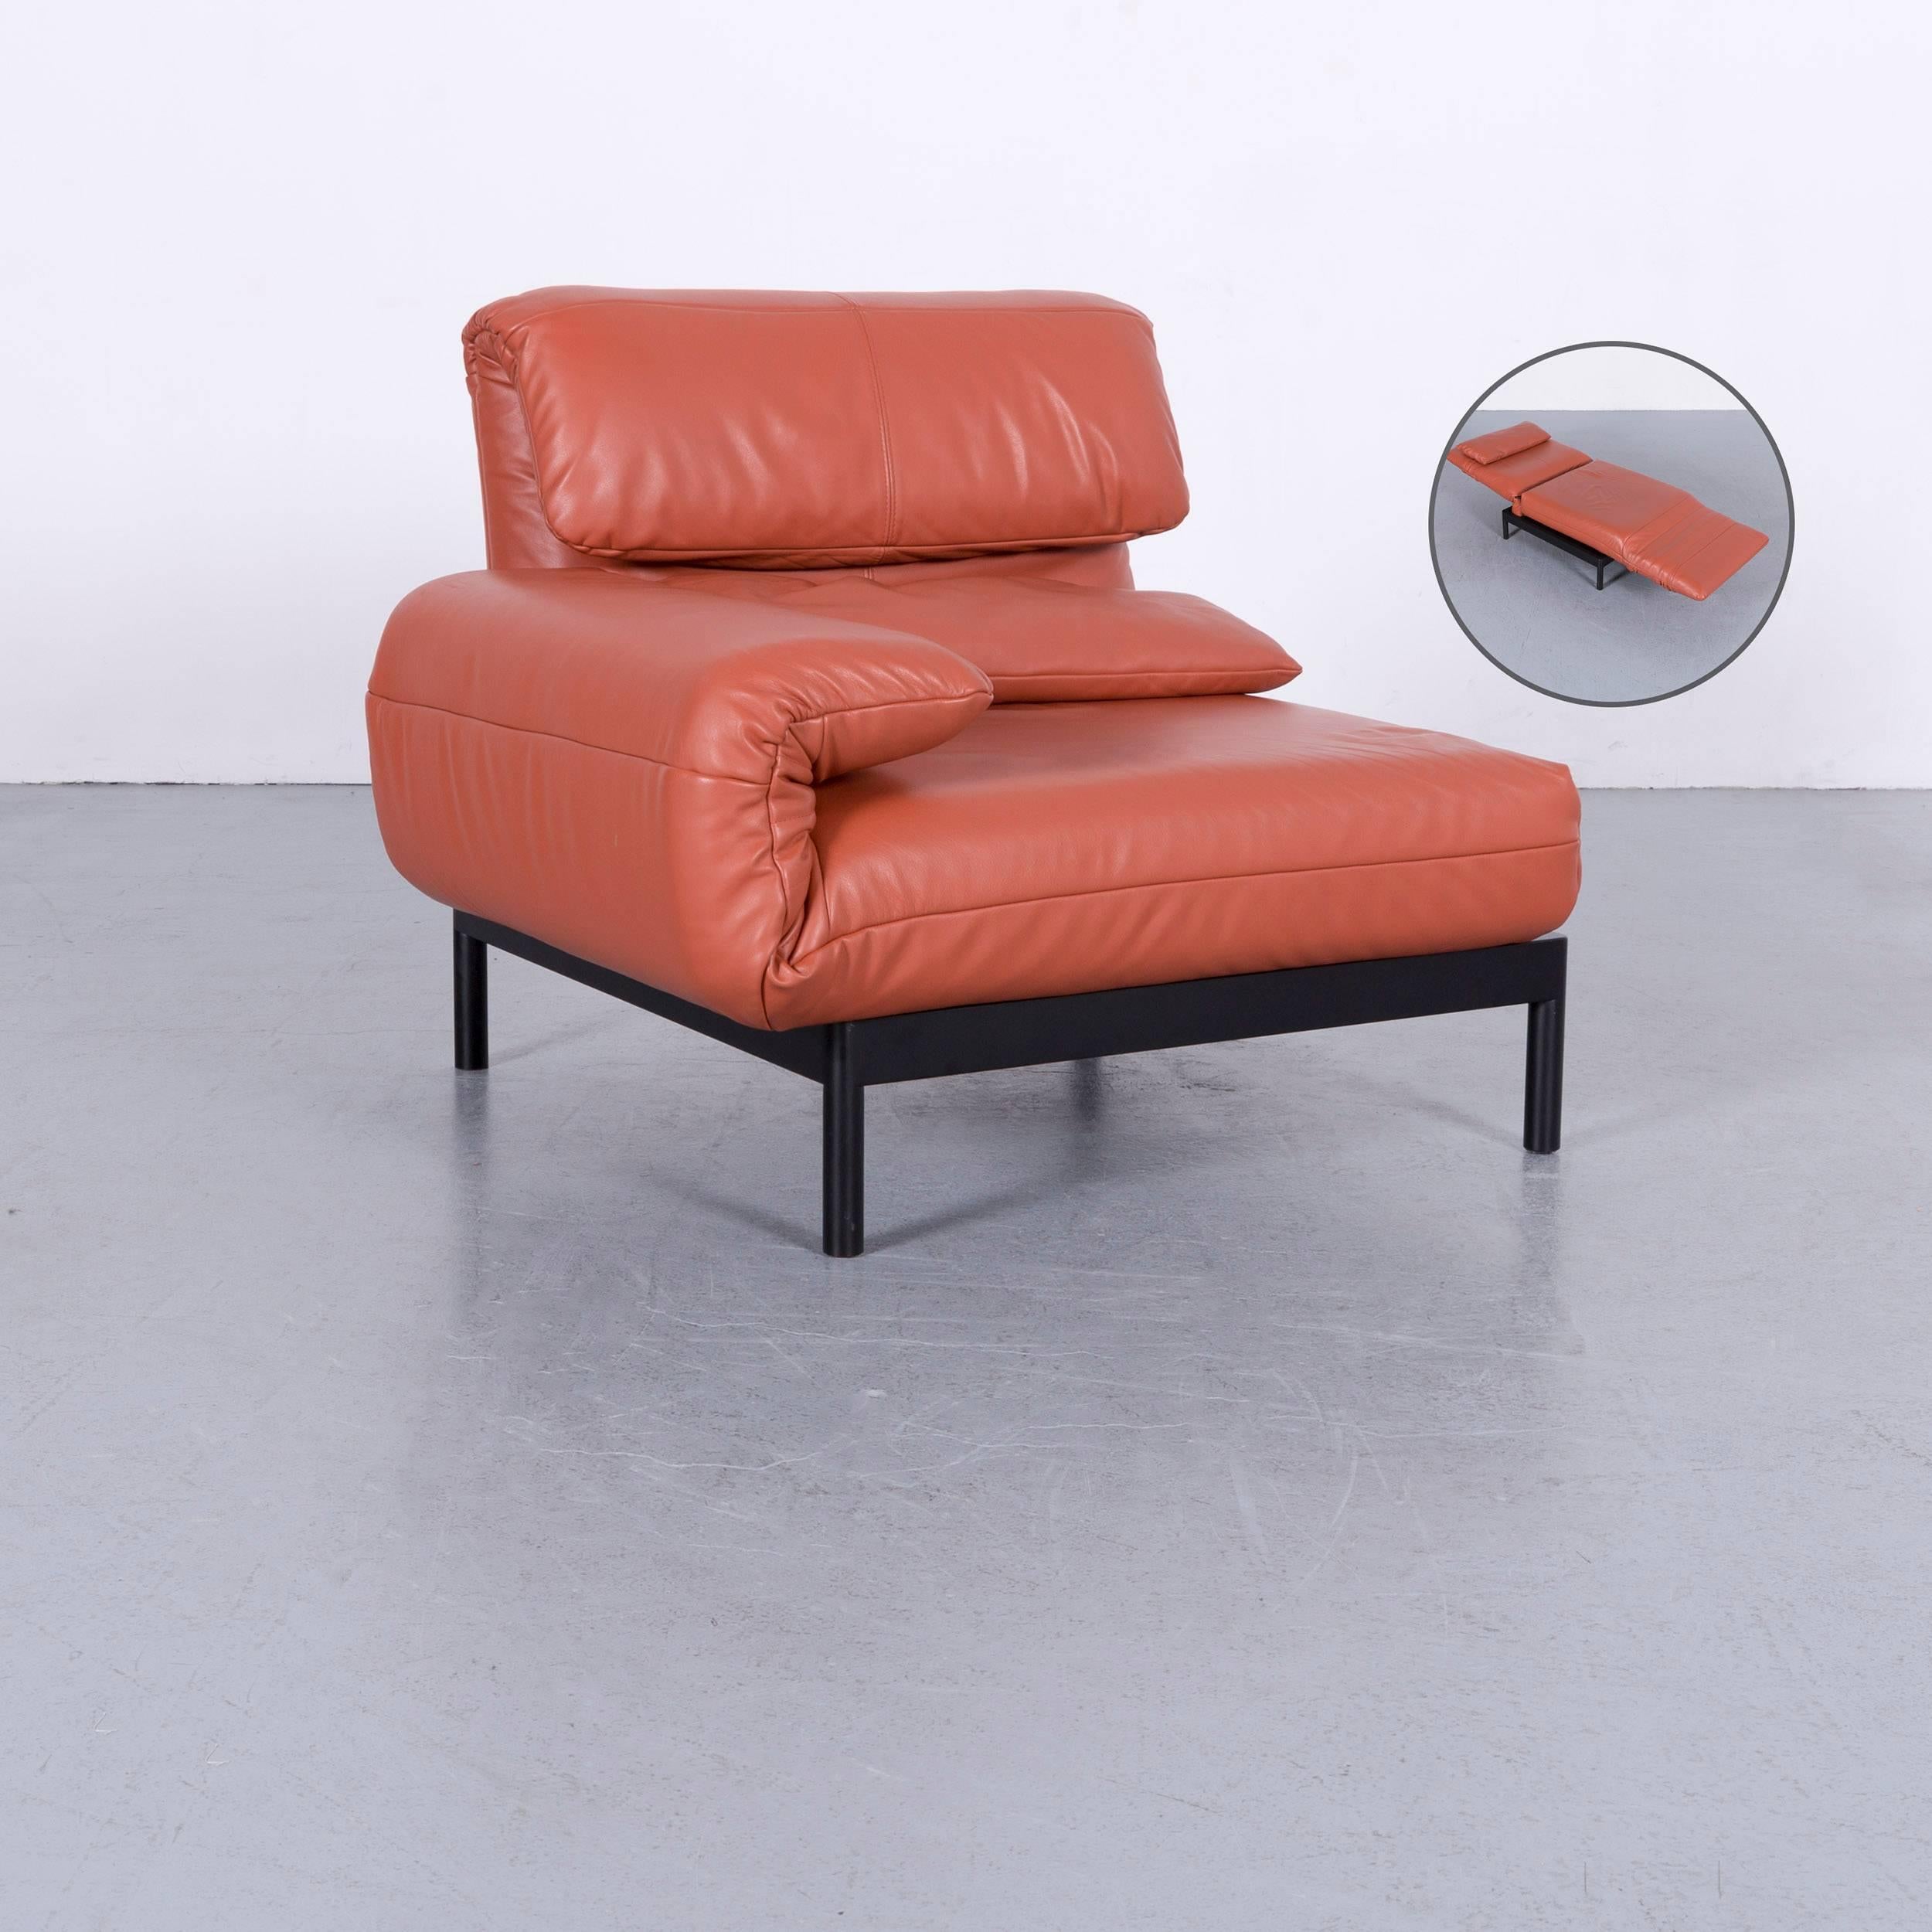 Rolf Benz Plura Designer Sofa Leather Orange Yellow Red Armchairs For Sale 10